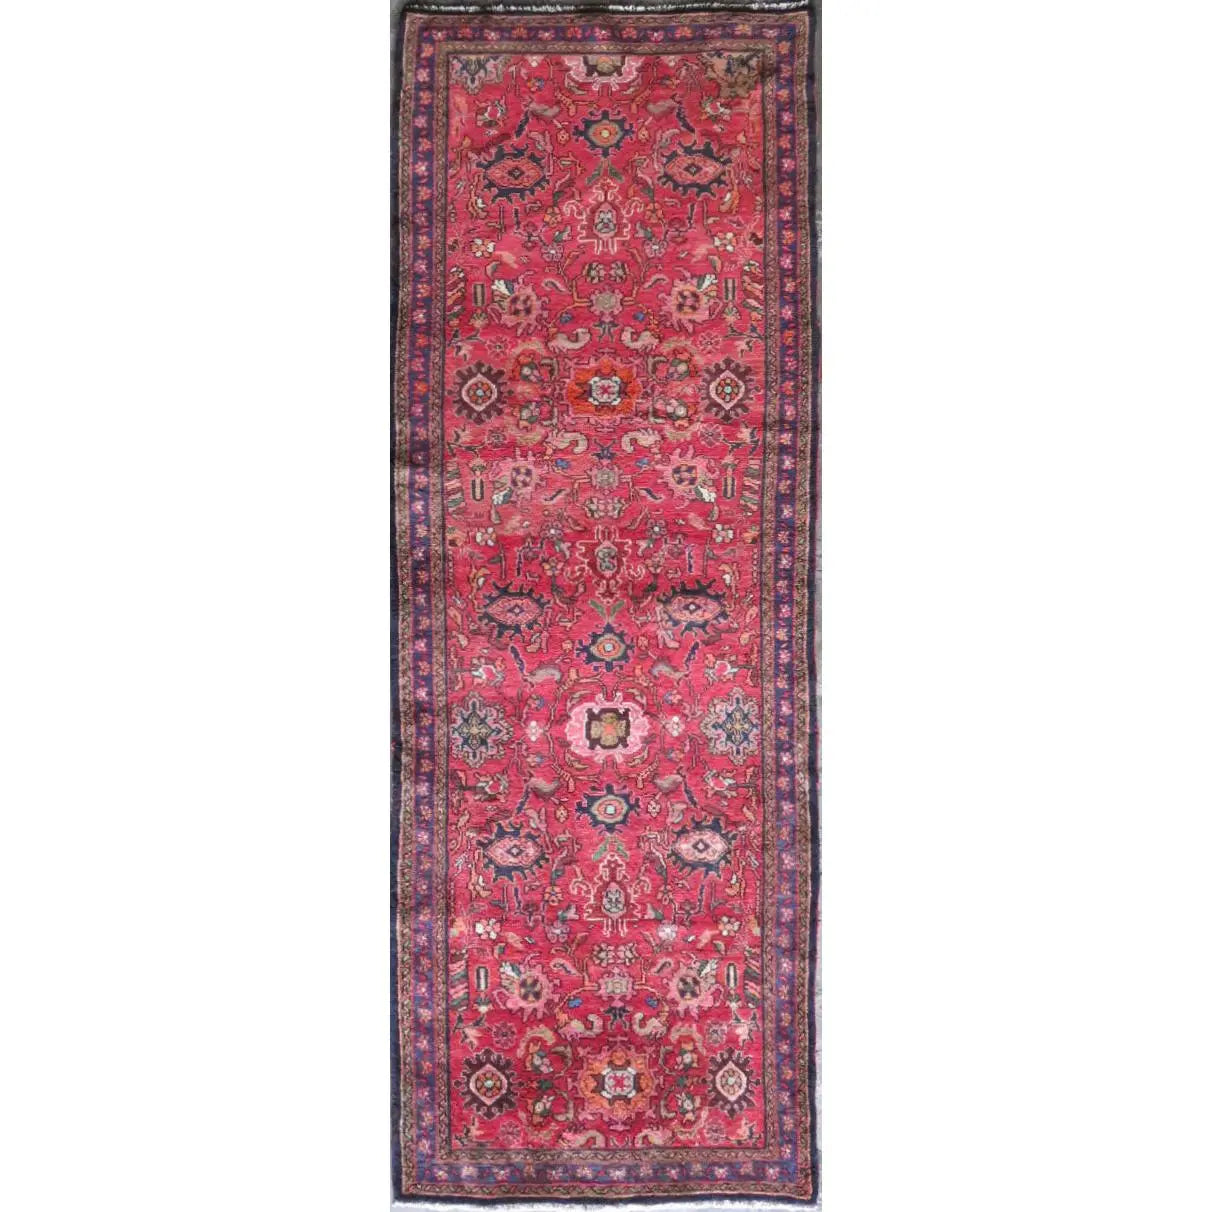 Hand-Knotted Persian Wool Rug _ Luxurious Vintage Design, 10'10" x 3'3", Artisan Crafted